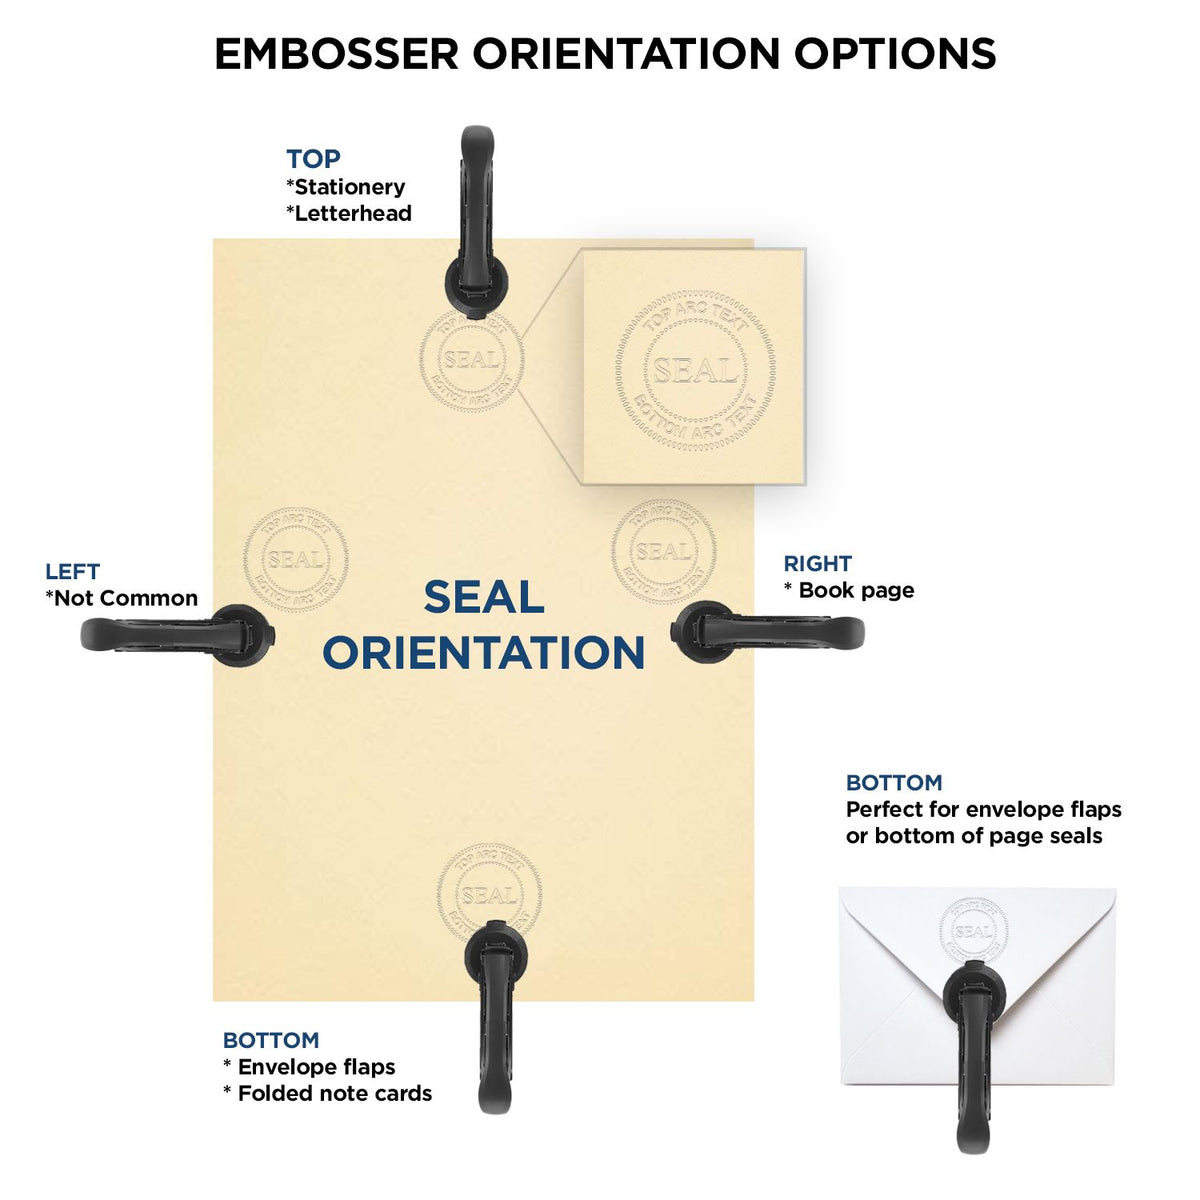 An infographic for the State of West Virginia Extended Long Reach Engineer Seal showing embosser orientation, this is showing examples of a top, bottom, right and left insert.